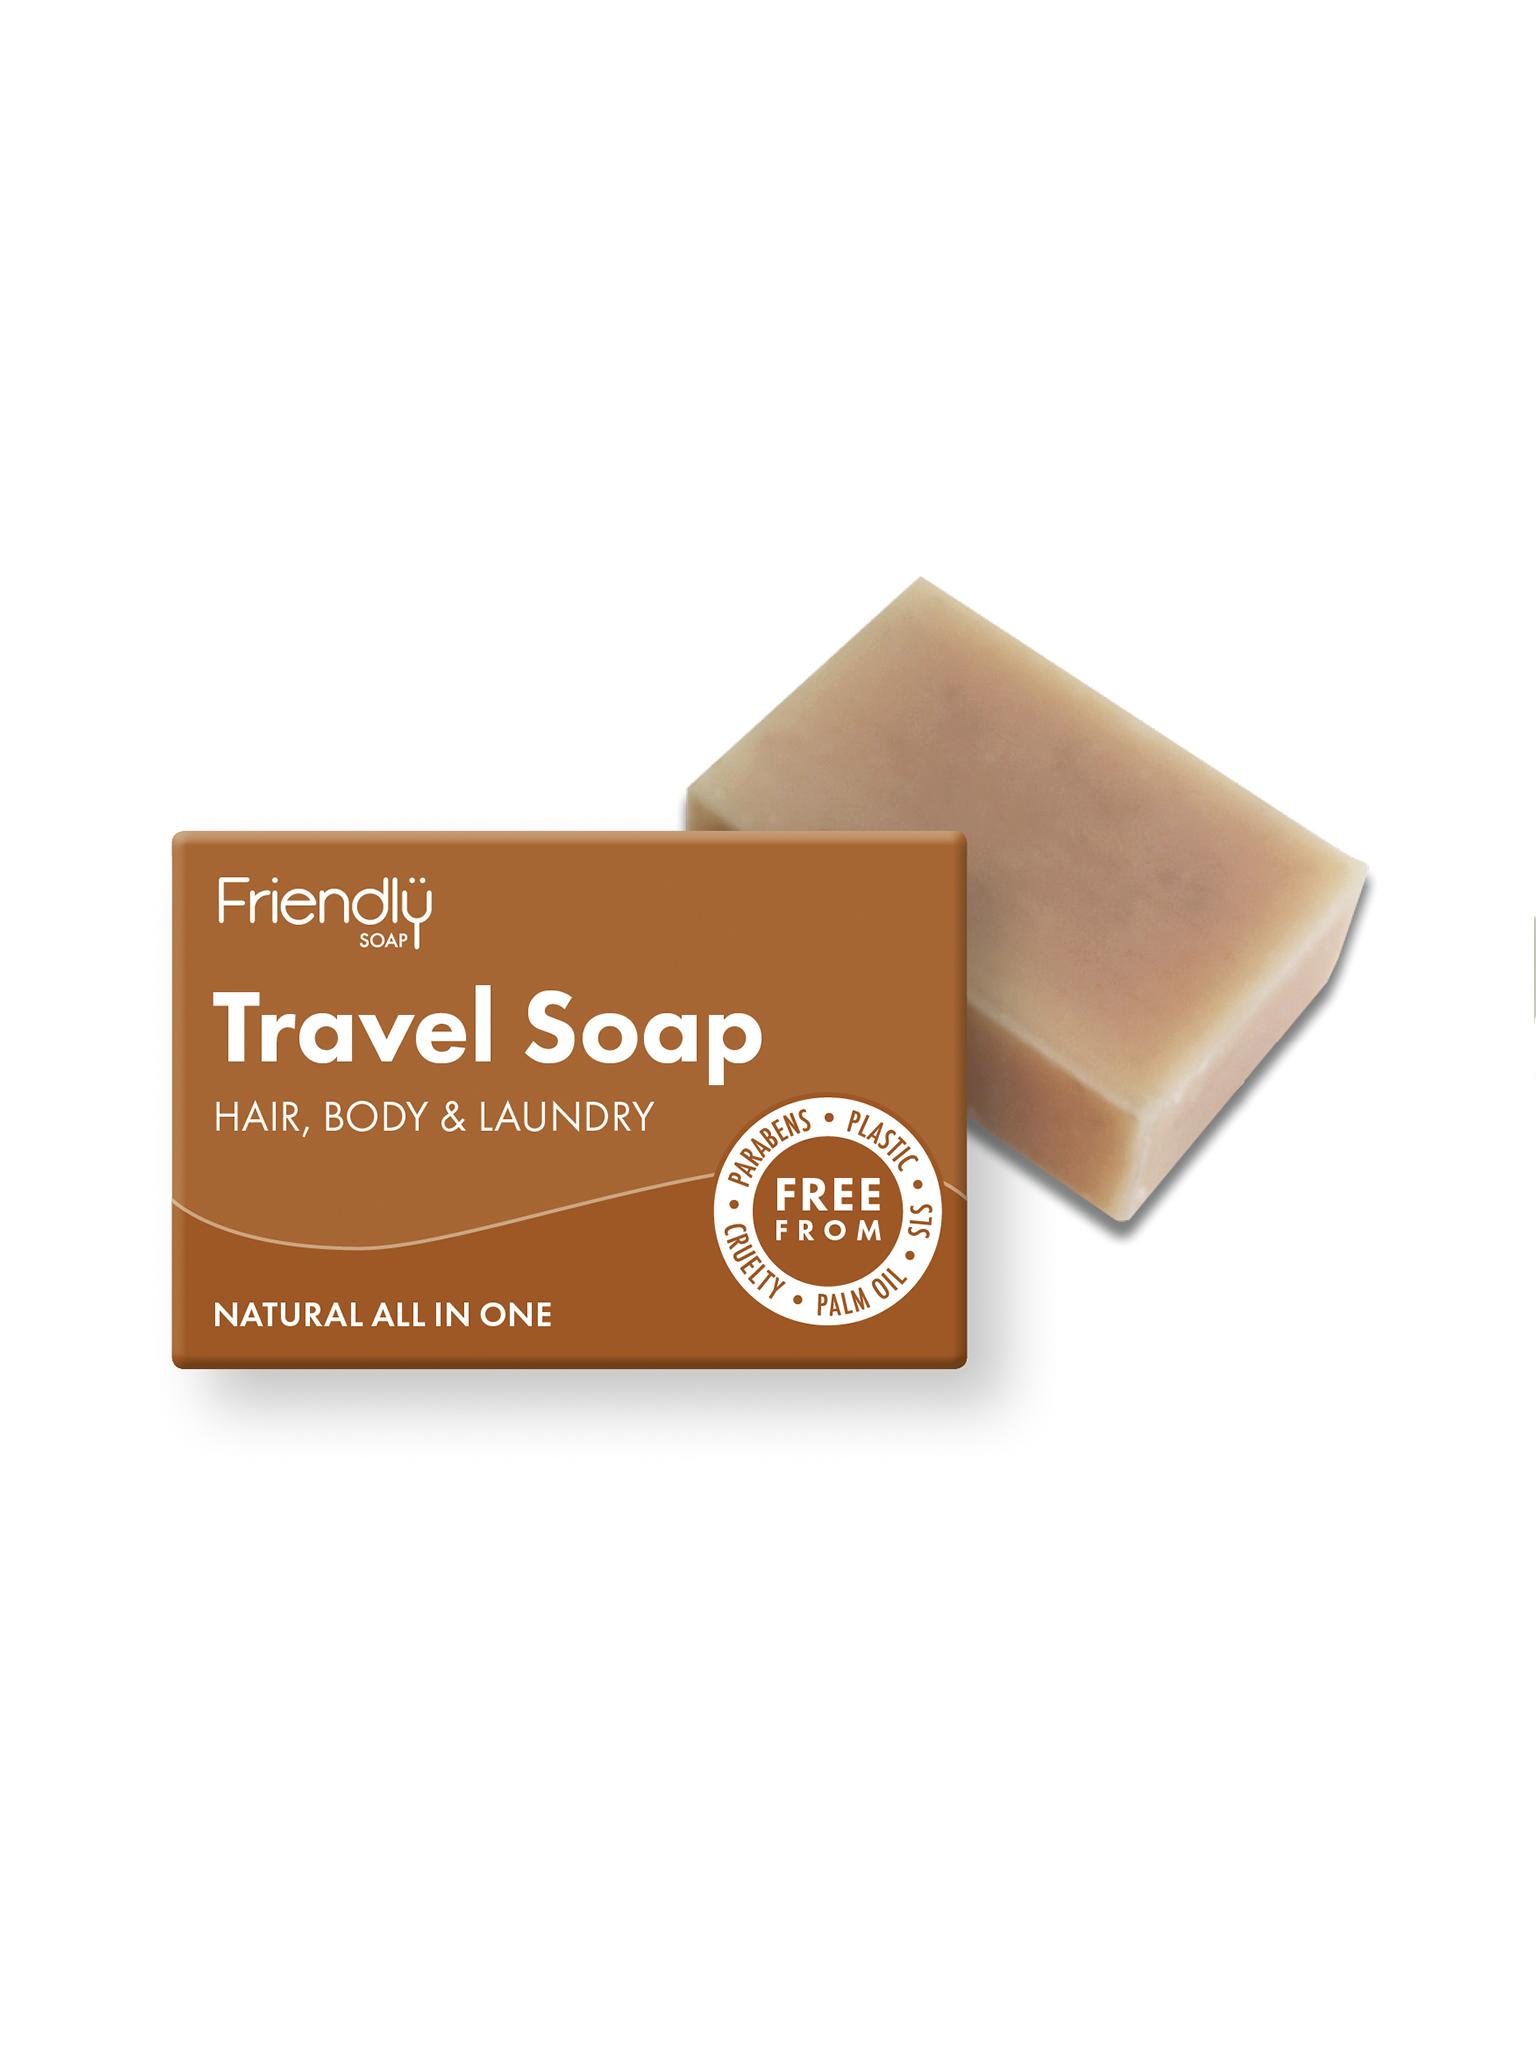 Friendly Travel Soap with box